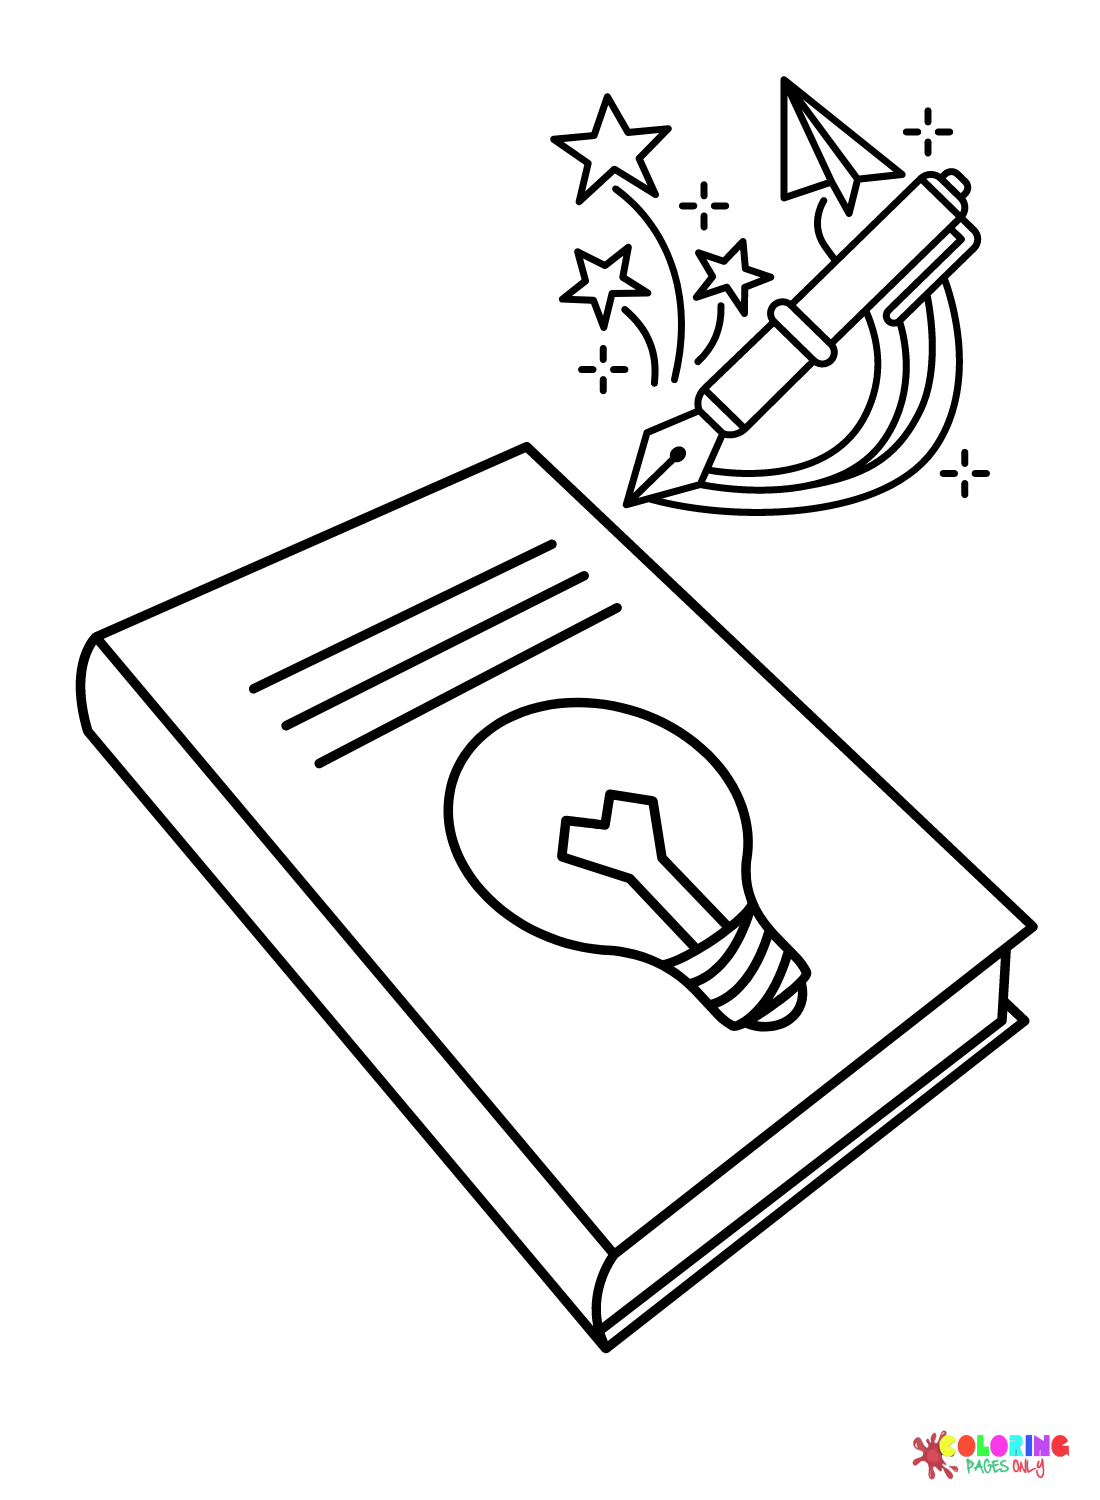 Free Intellectual Images Coloring Page